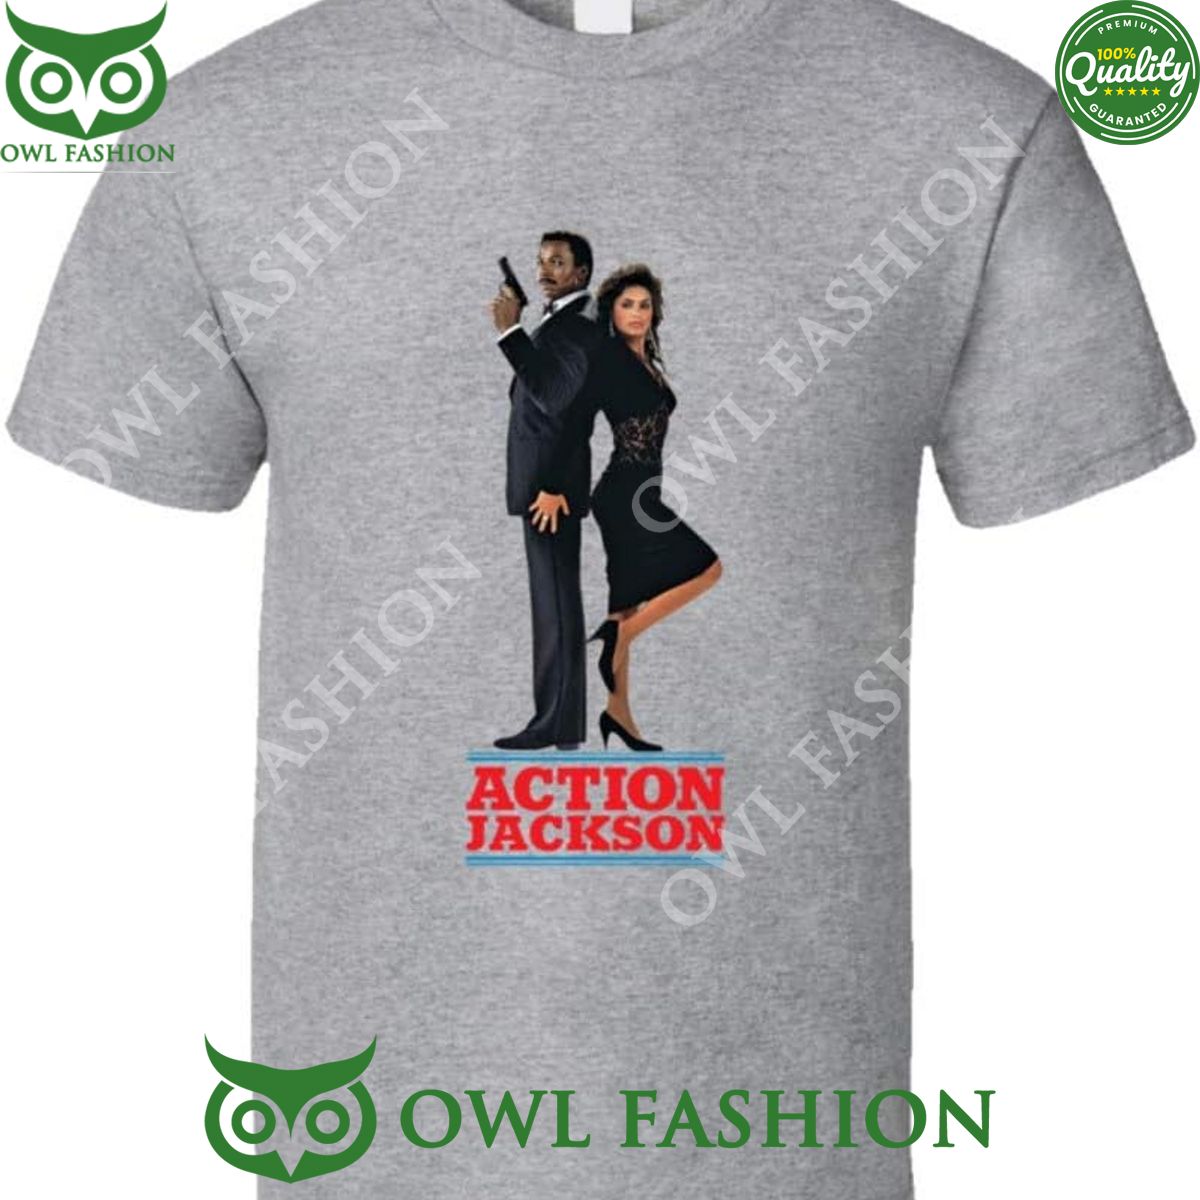 Action Jackson Carl Weathers 80s Action Movie T Shirt I like your hairstyle